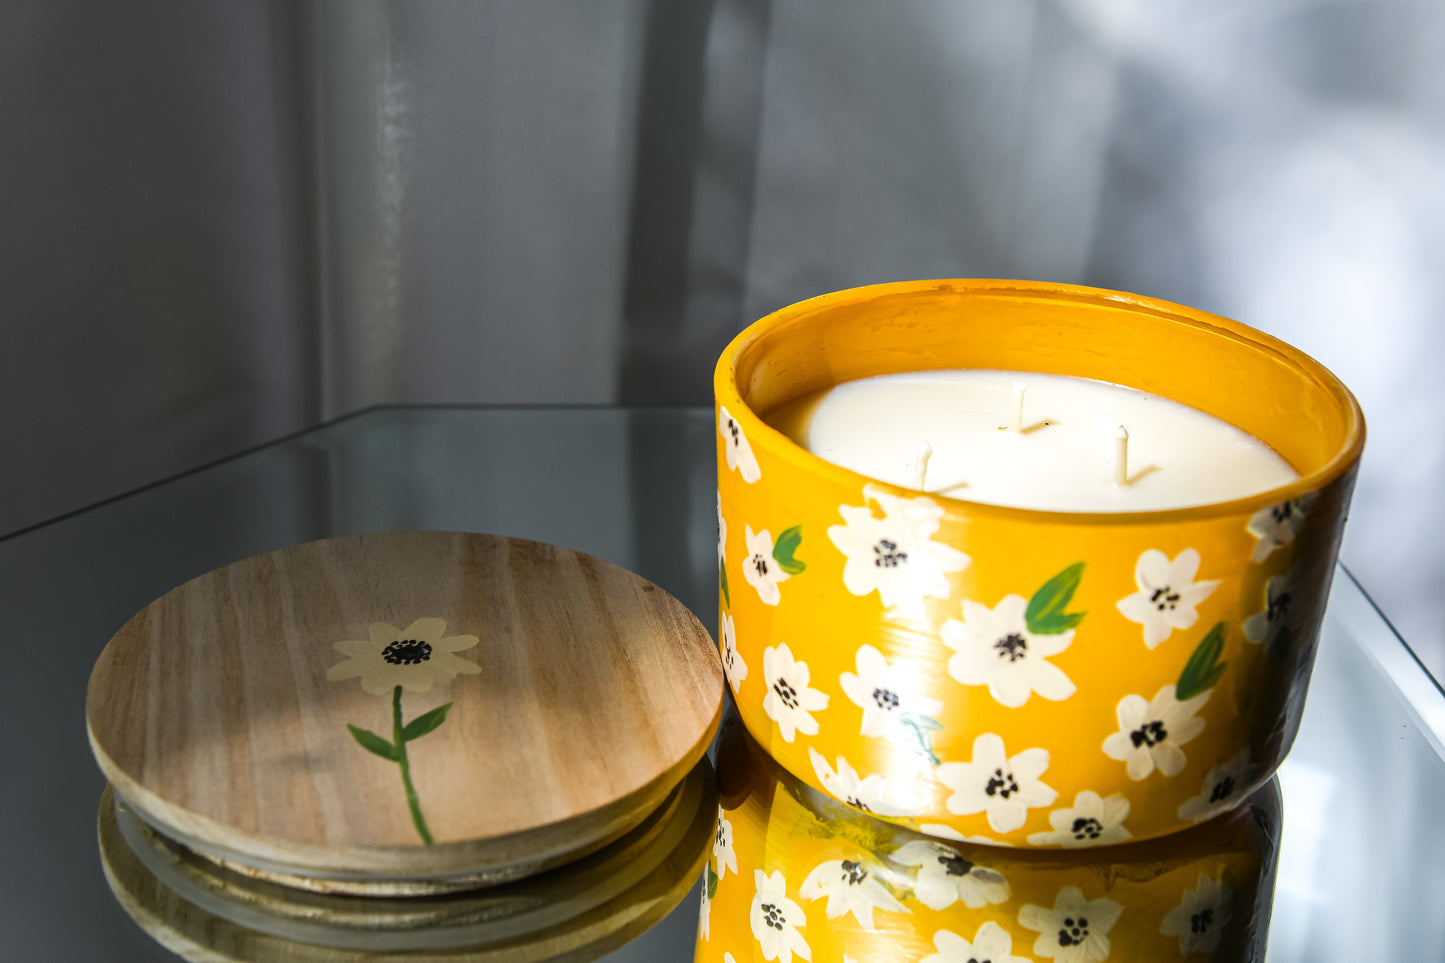 Brush & Blossom x LKTCO Candle